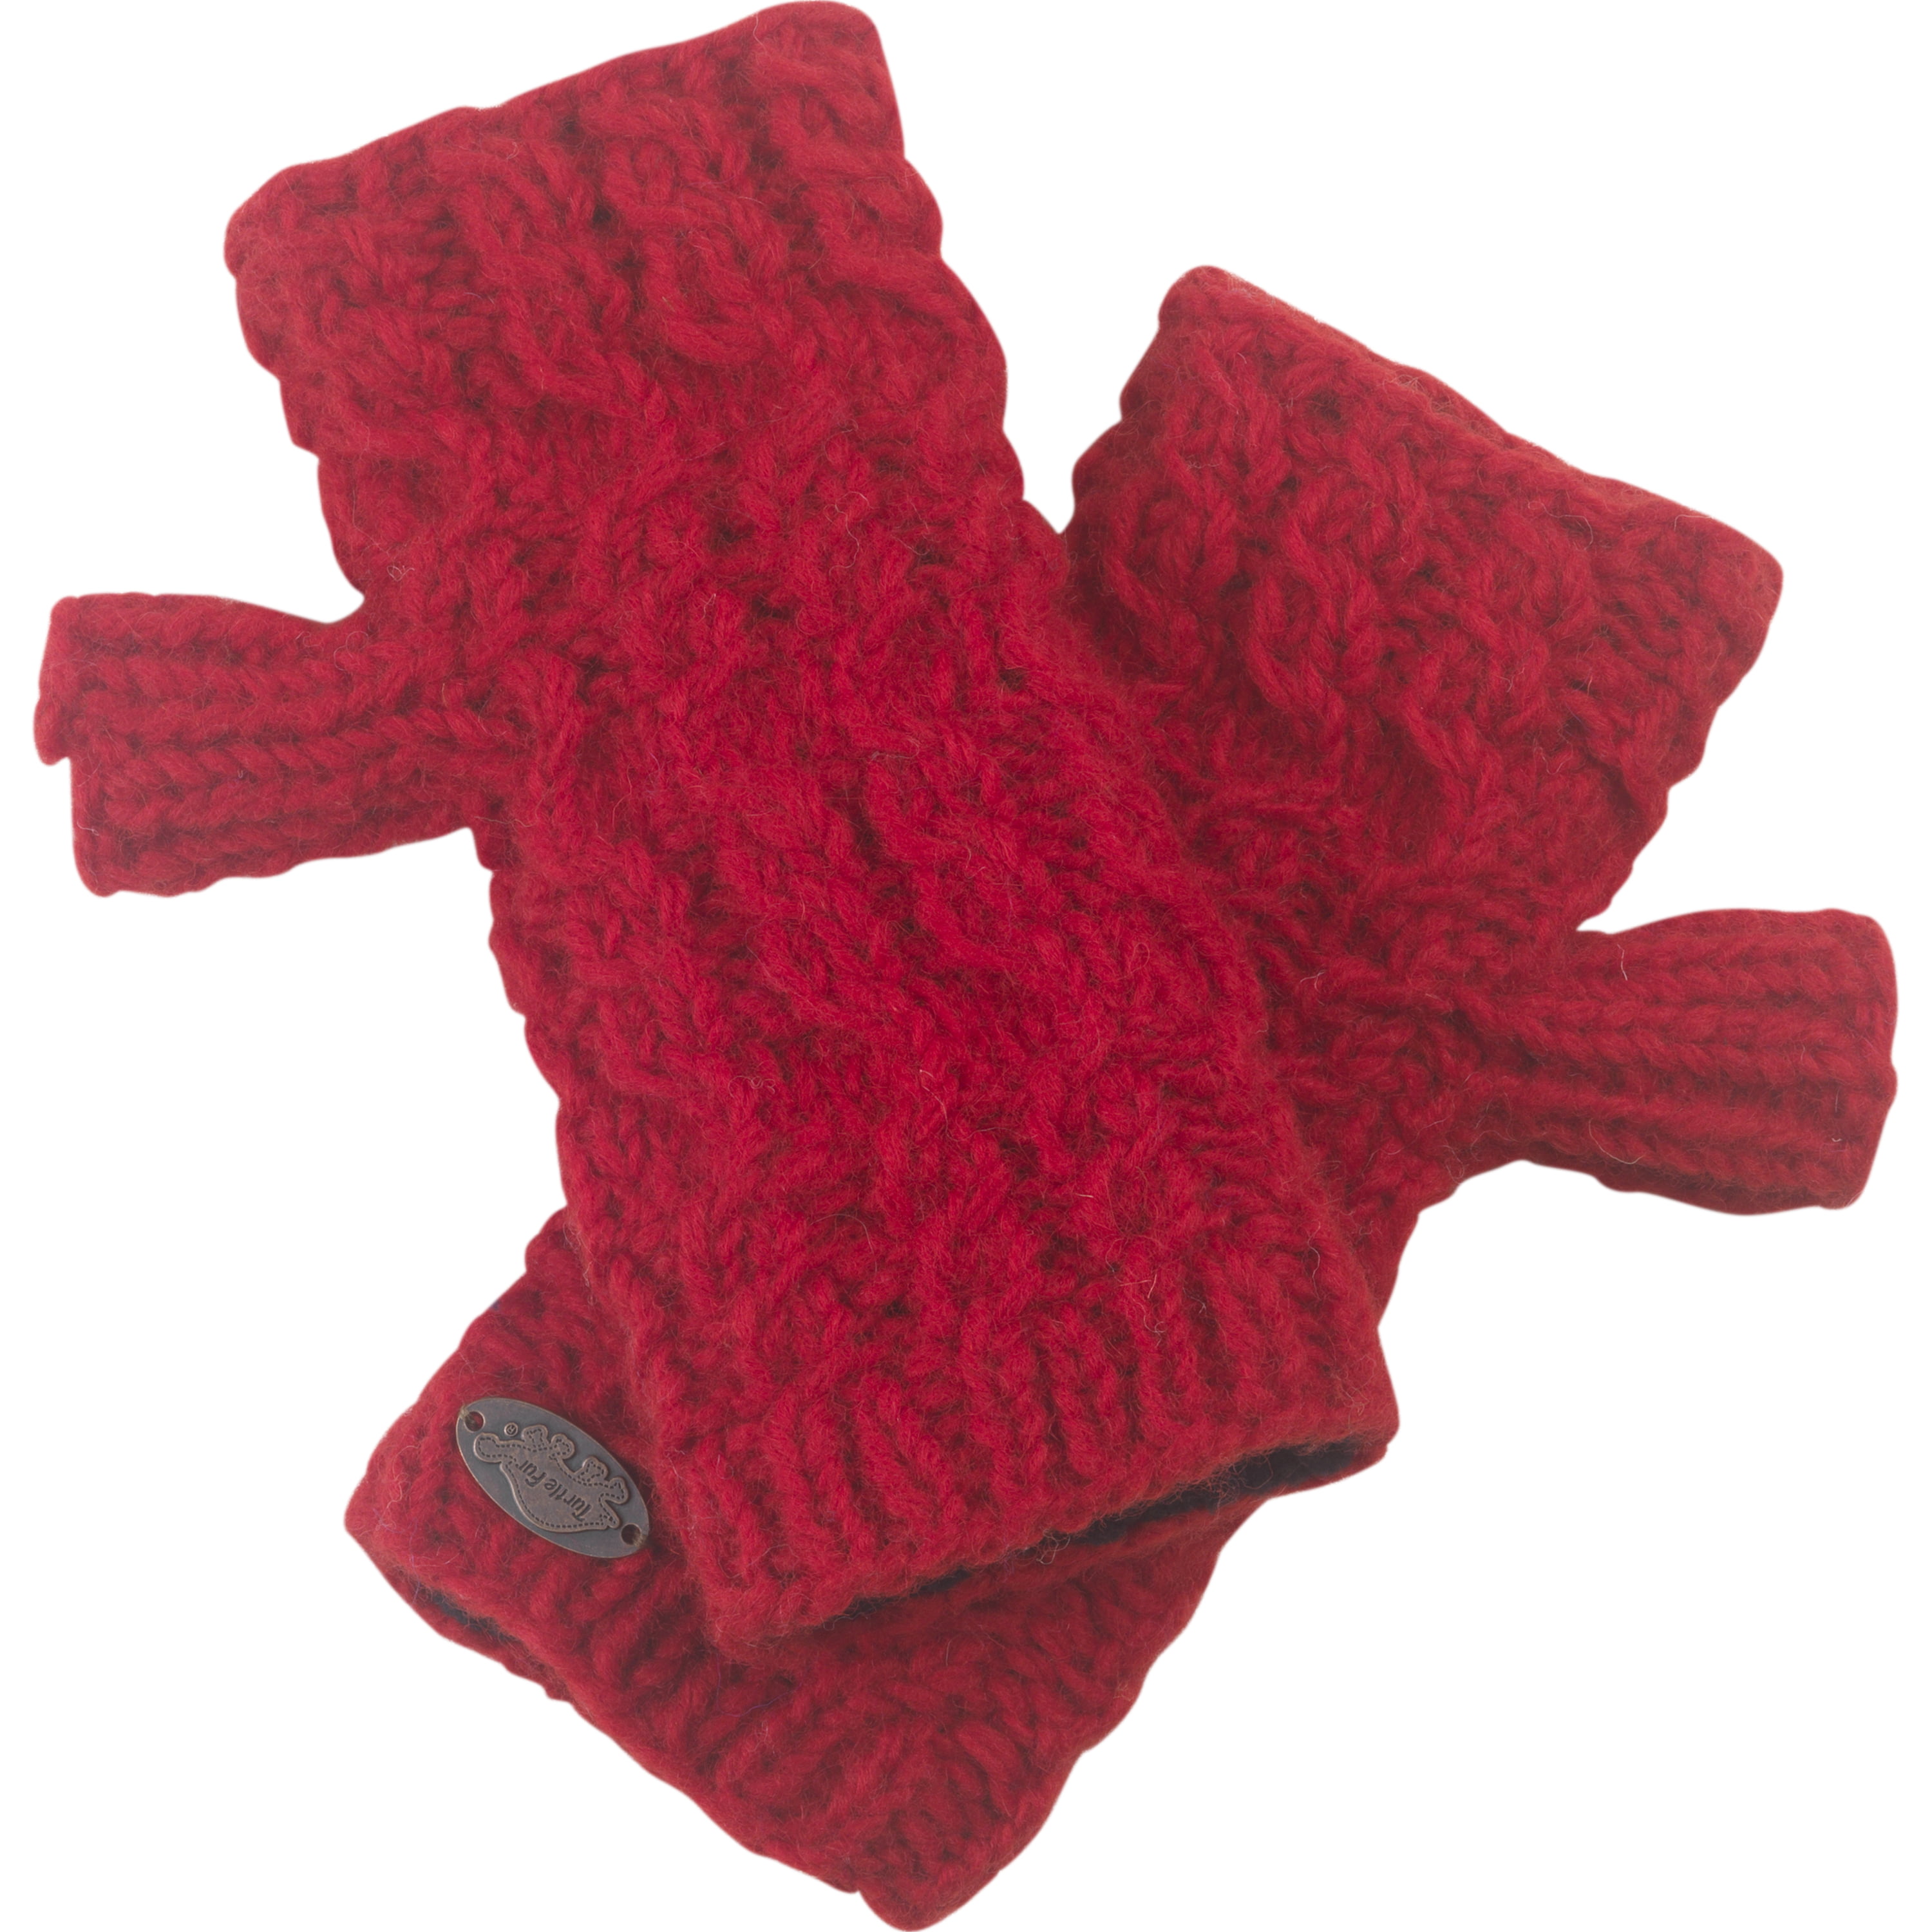 Hand Knit Fingerless Wool Texting Mittens Fleece Lined Made in Nepal